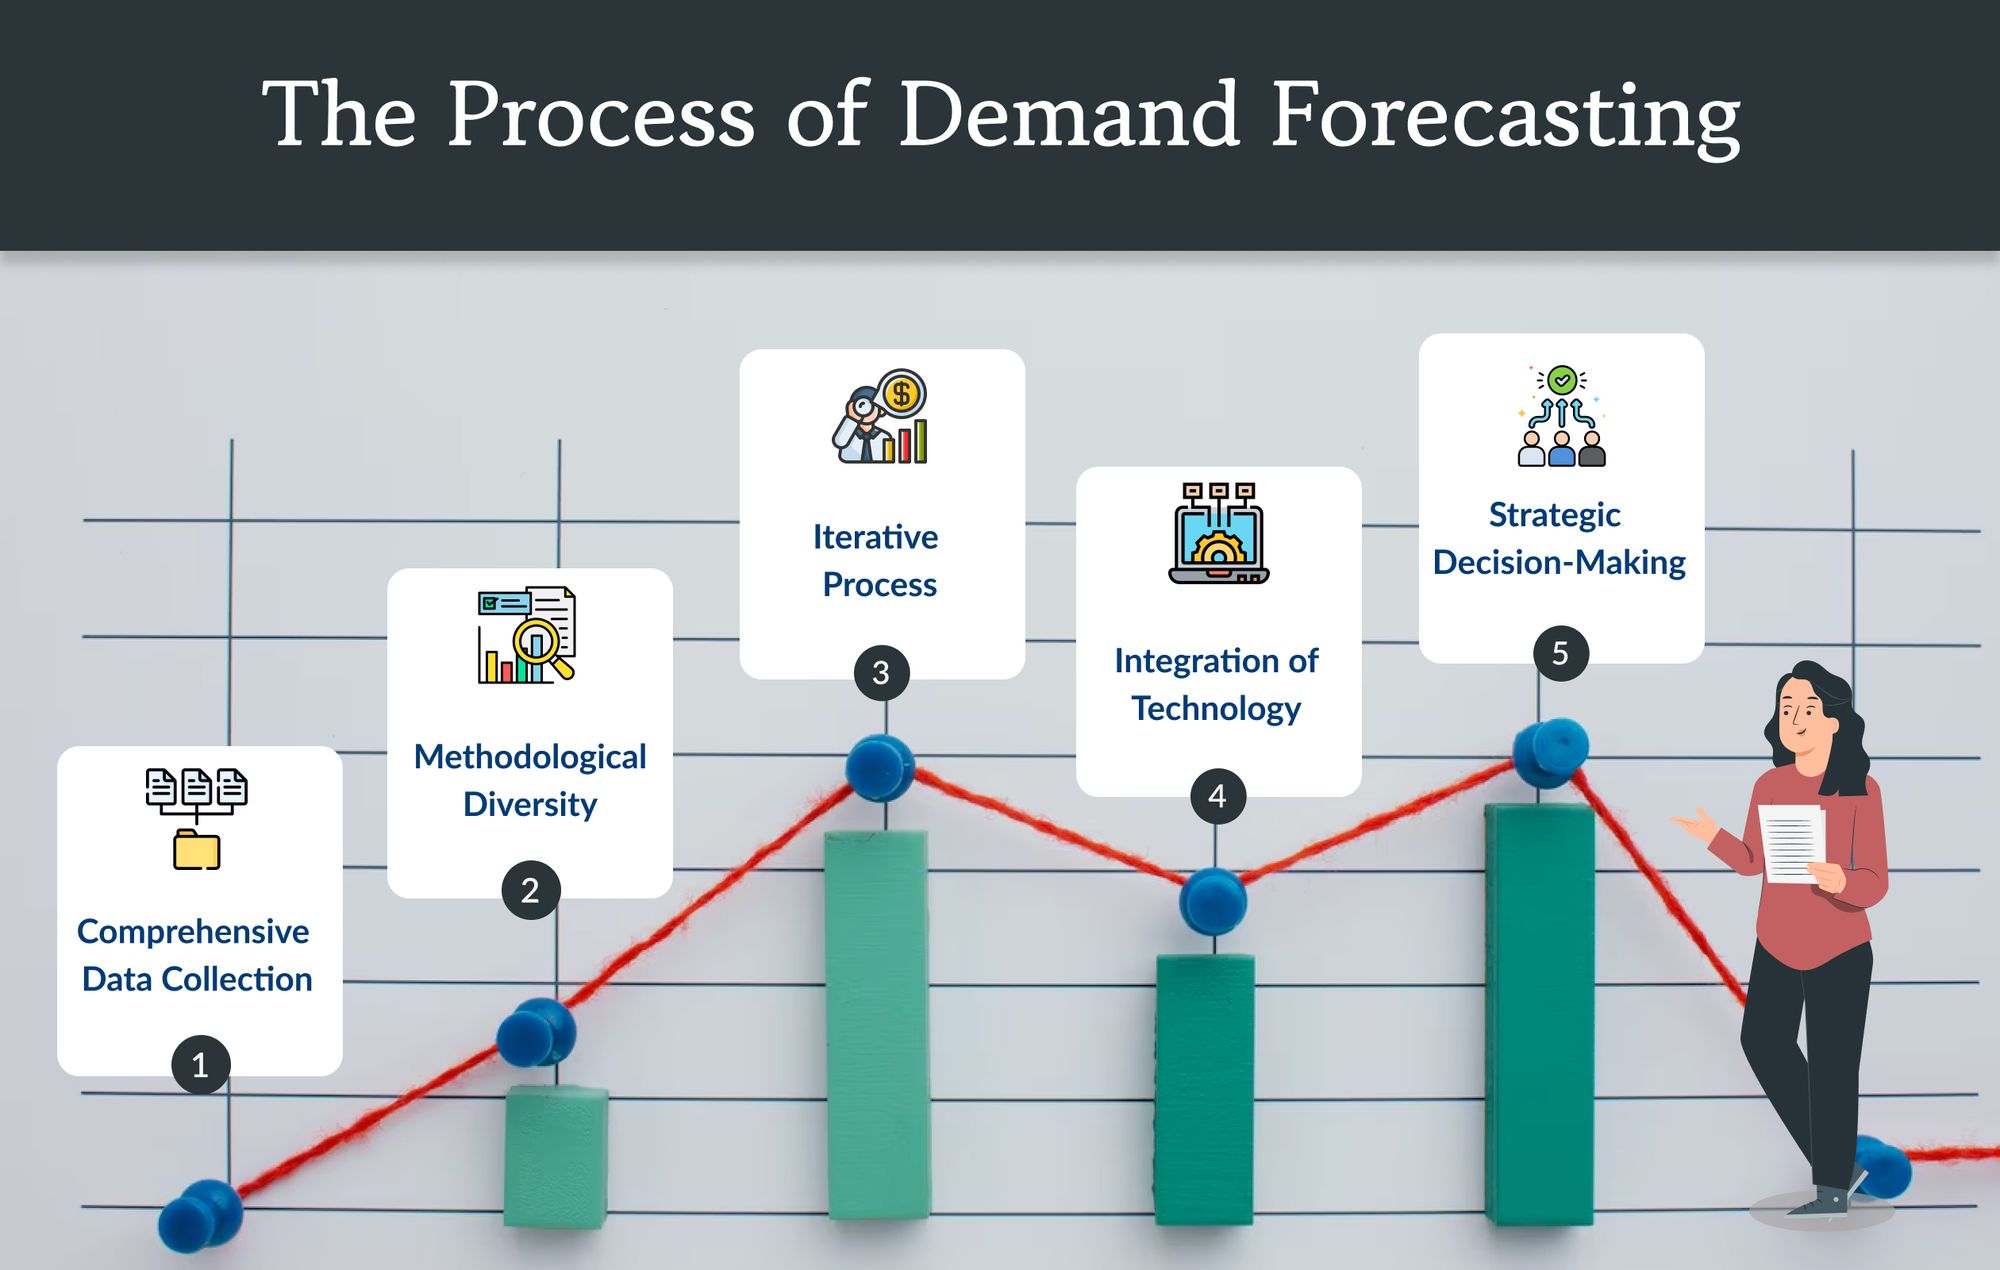 The Process of Demand Forecasting